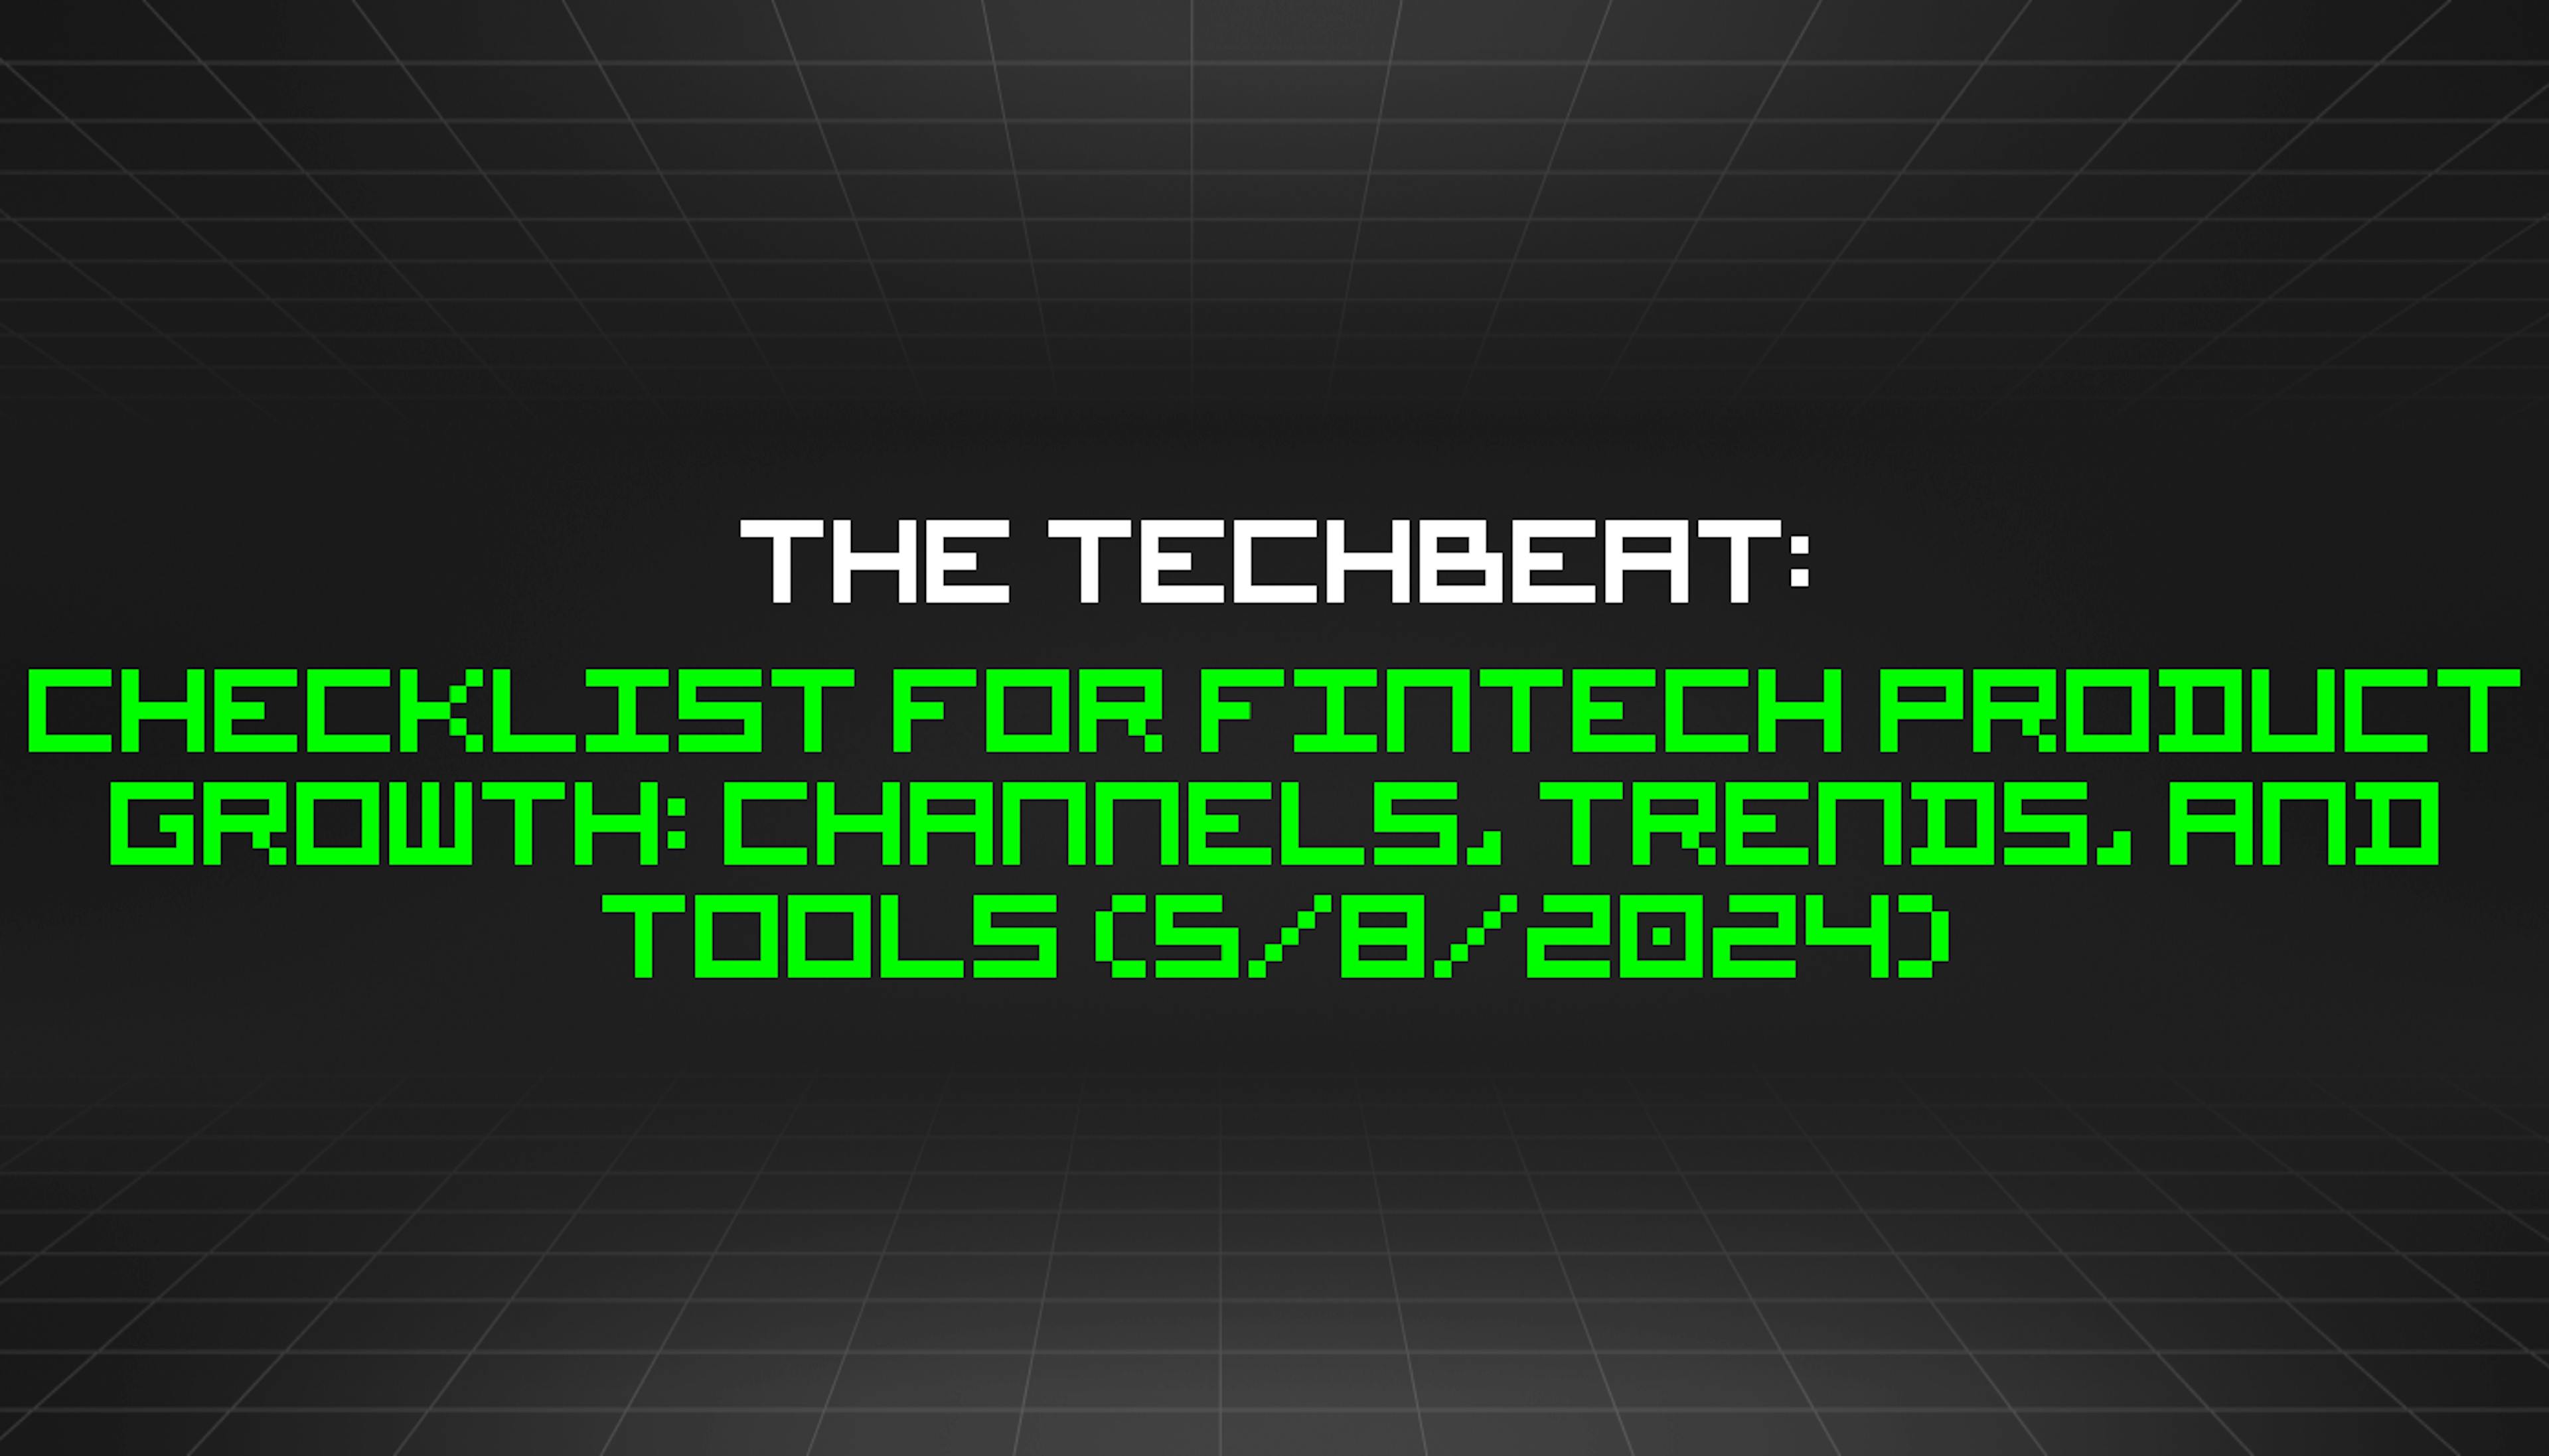 featured image - The TechBeat: Checklist for FinTech Product Growth: Channels, Trends, and Tools (5/8/2024)